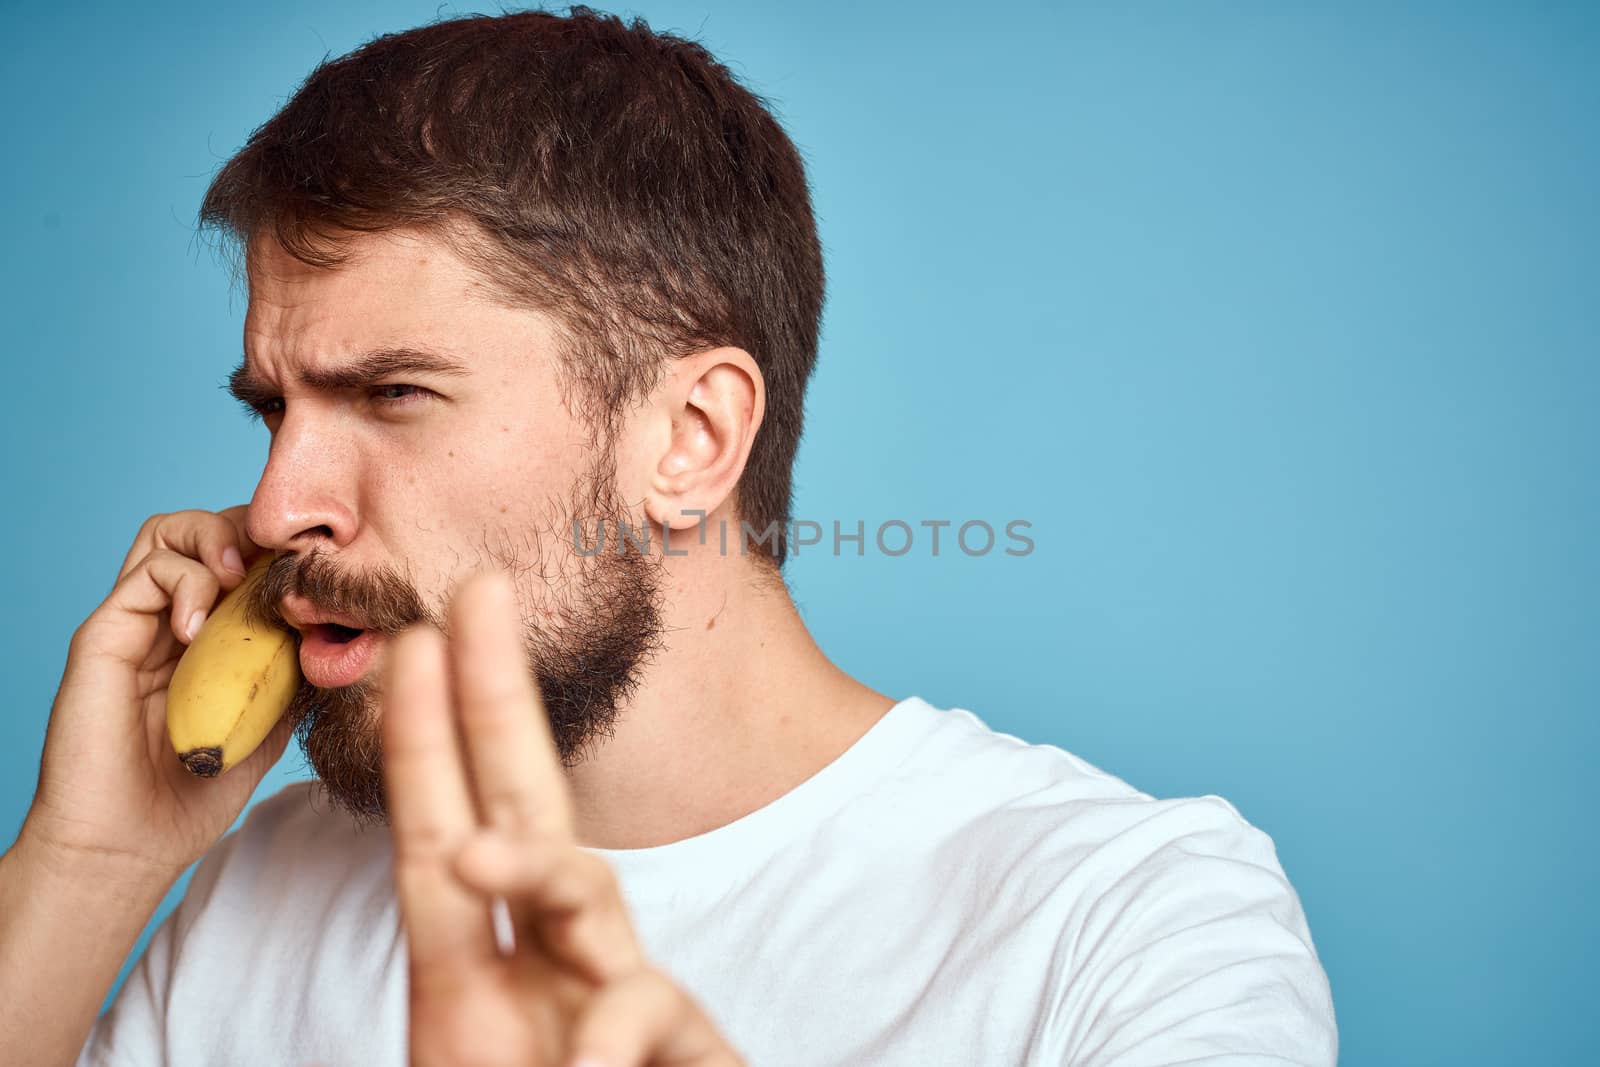 a man with a banana is caught in a white t-shirt on a blue background concept of communication by phone. High quality photo